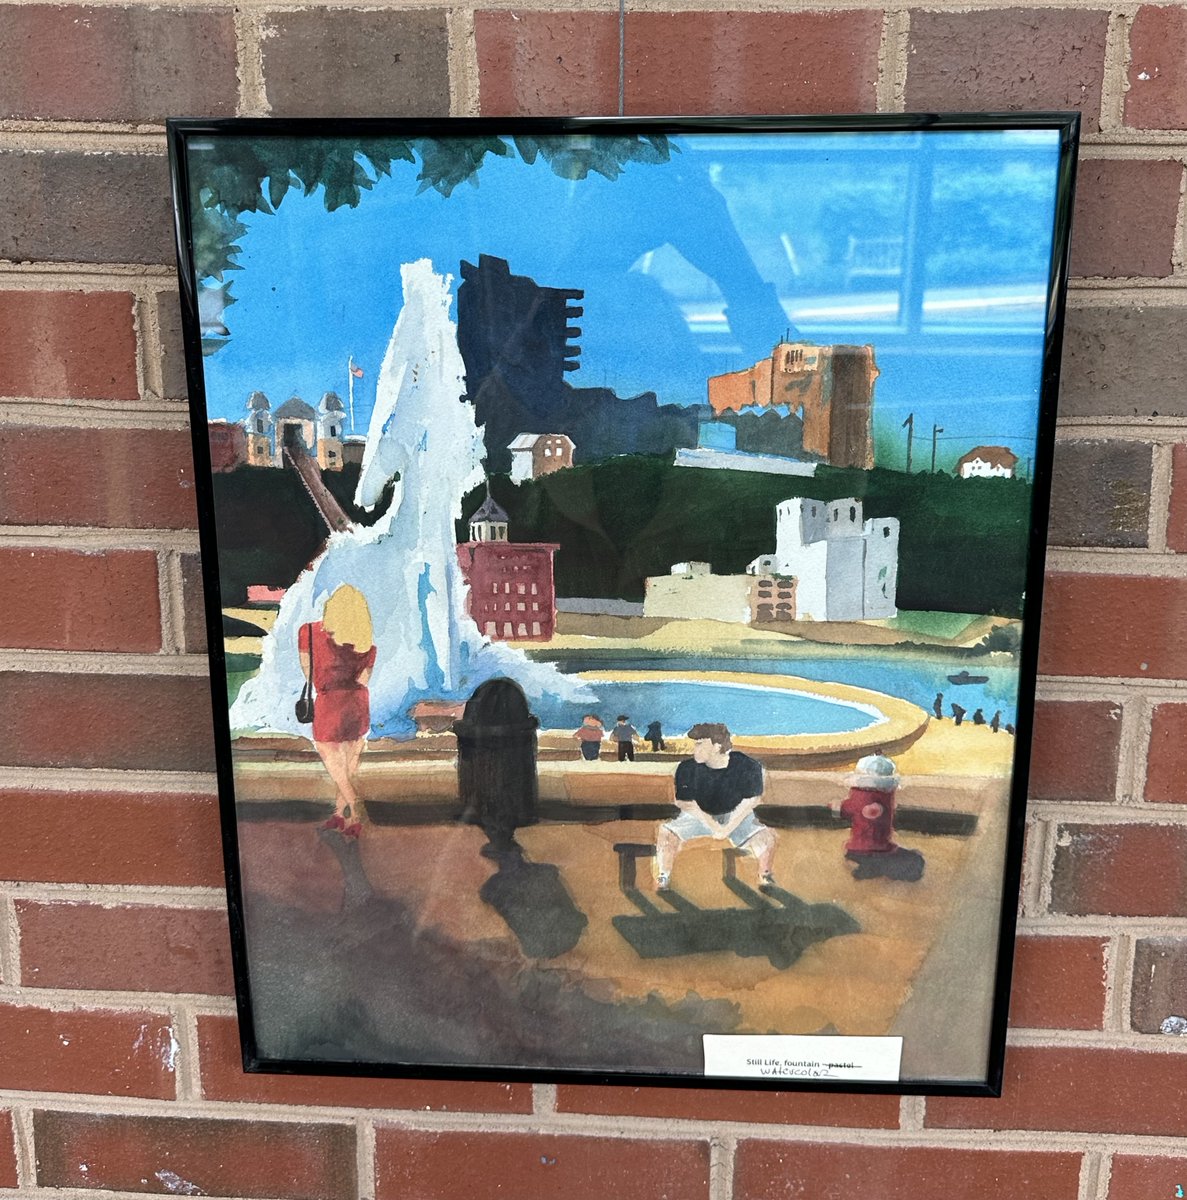 Ralph Amedick is a Pittsburgh artist who often uses Pittsburgh scenes as his subject. His work will be on display at Mt. Lebanon Public Library throughout the month of May.